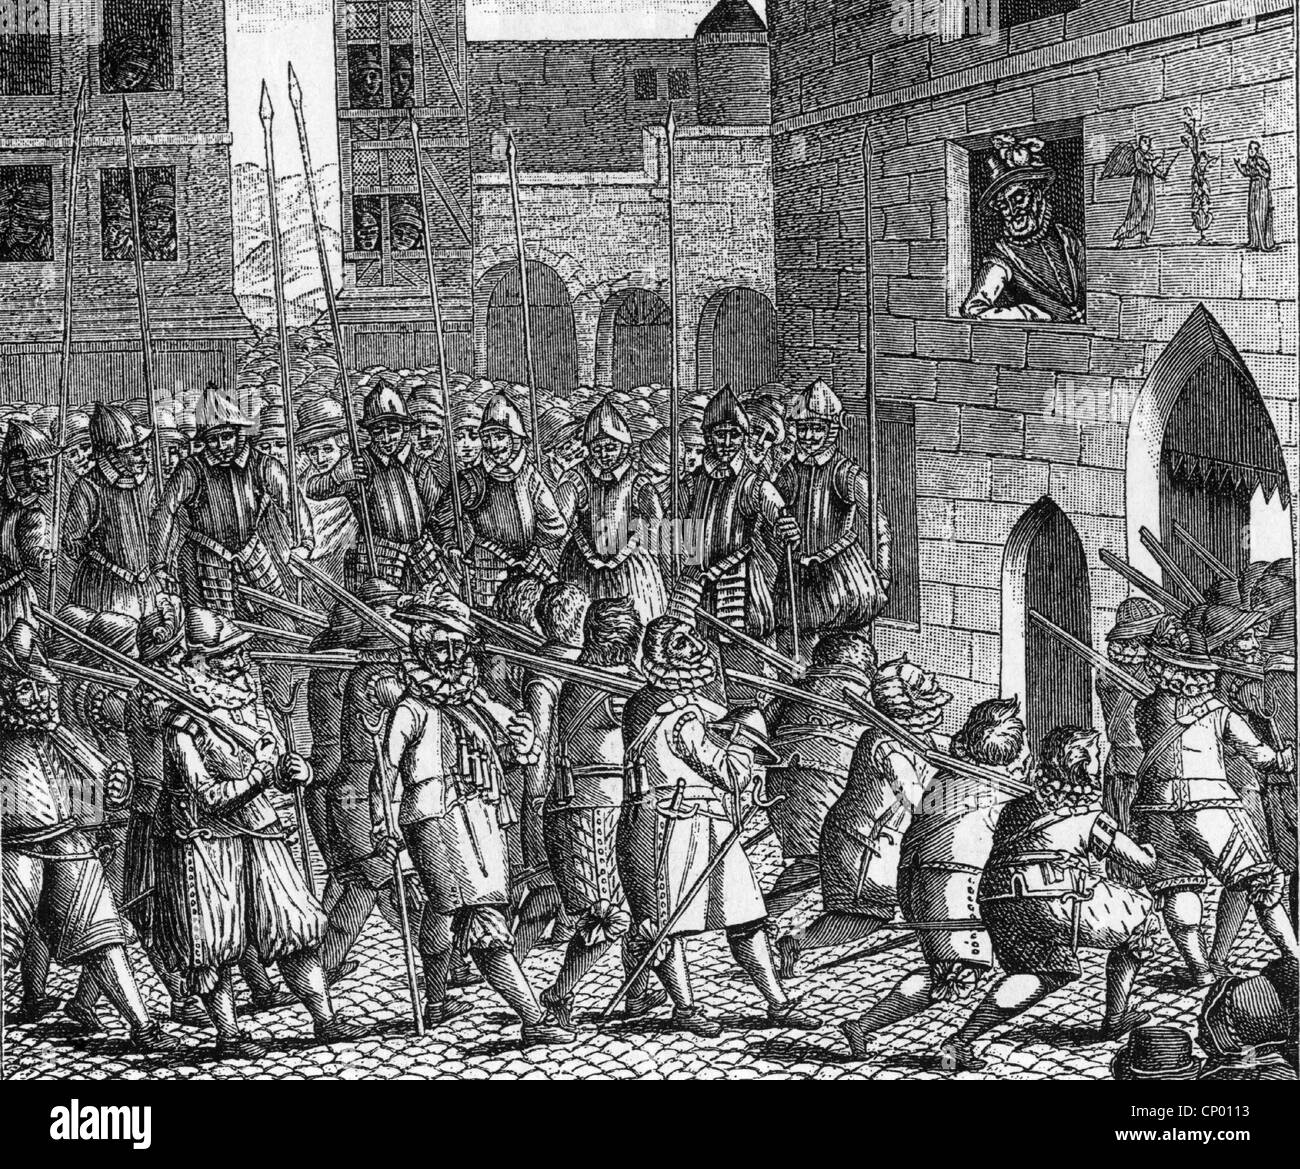 events, French Wars of Religion 1562 - 1598, Eigth War 1585 - 1598, the Spanish garrison is leaving Paris, 1593, King Henry IV at the window, contemporary copper engraving, France, Civil War, religious War, catholics, catholic league, retreat, Spaniards, Spain, soldiers, Henri III on Navarre, 16th century, historic, historical, people, Additional-Rights-Clearences-Not Available Stock Photo